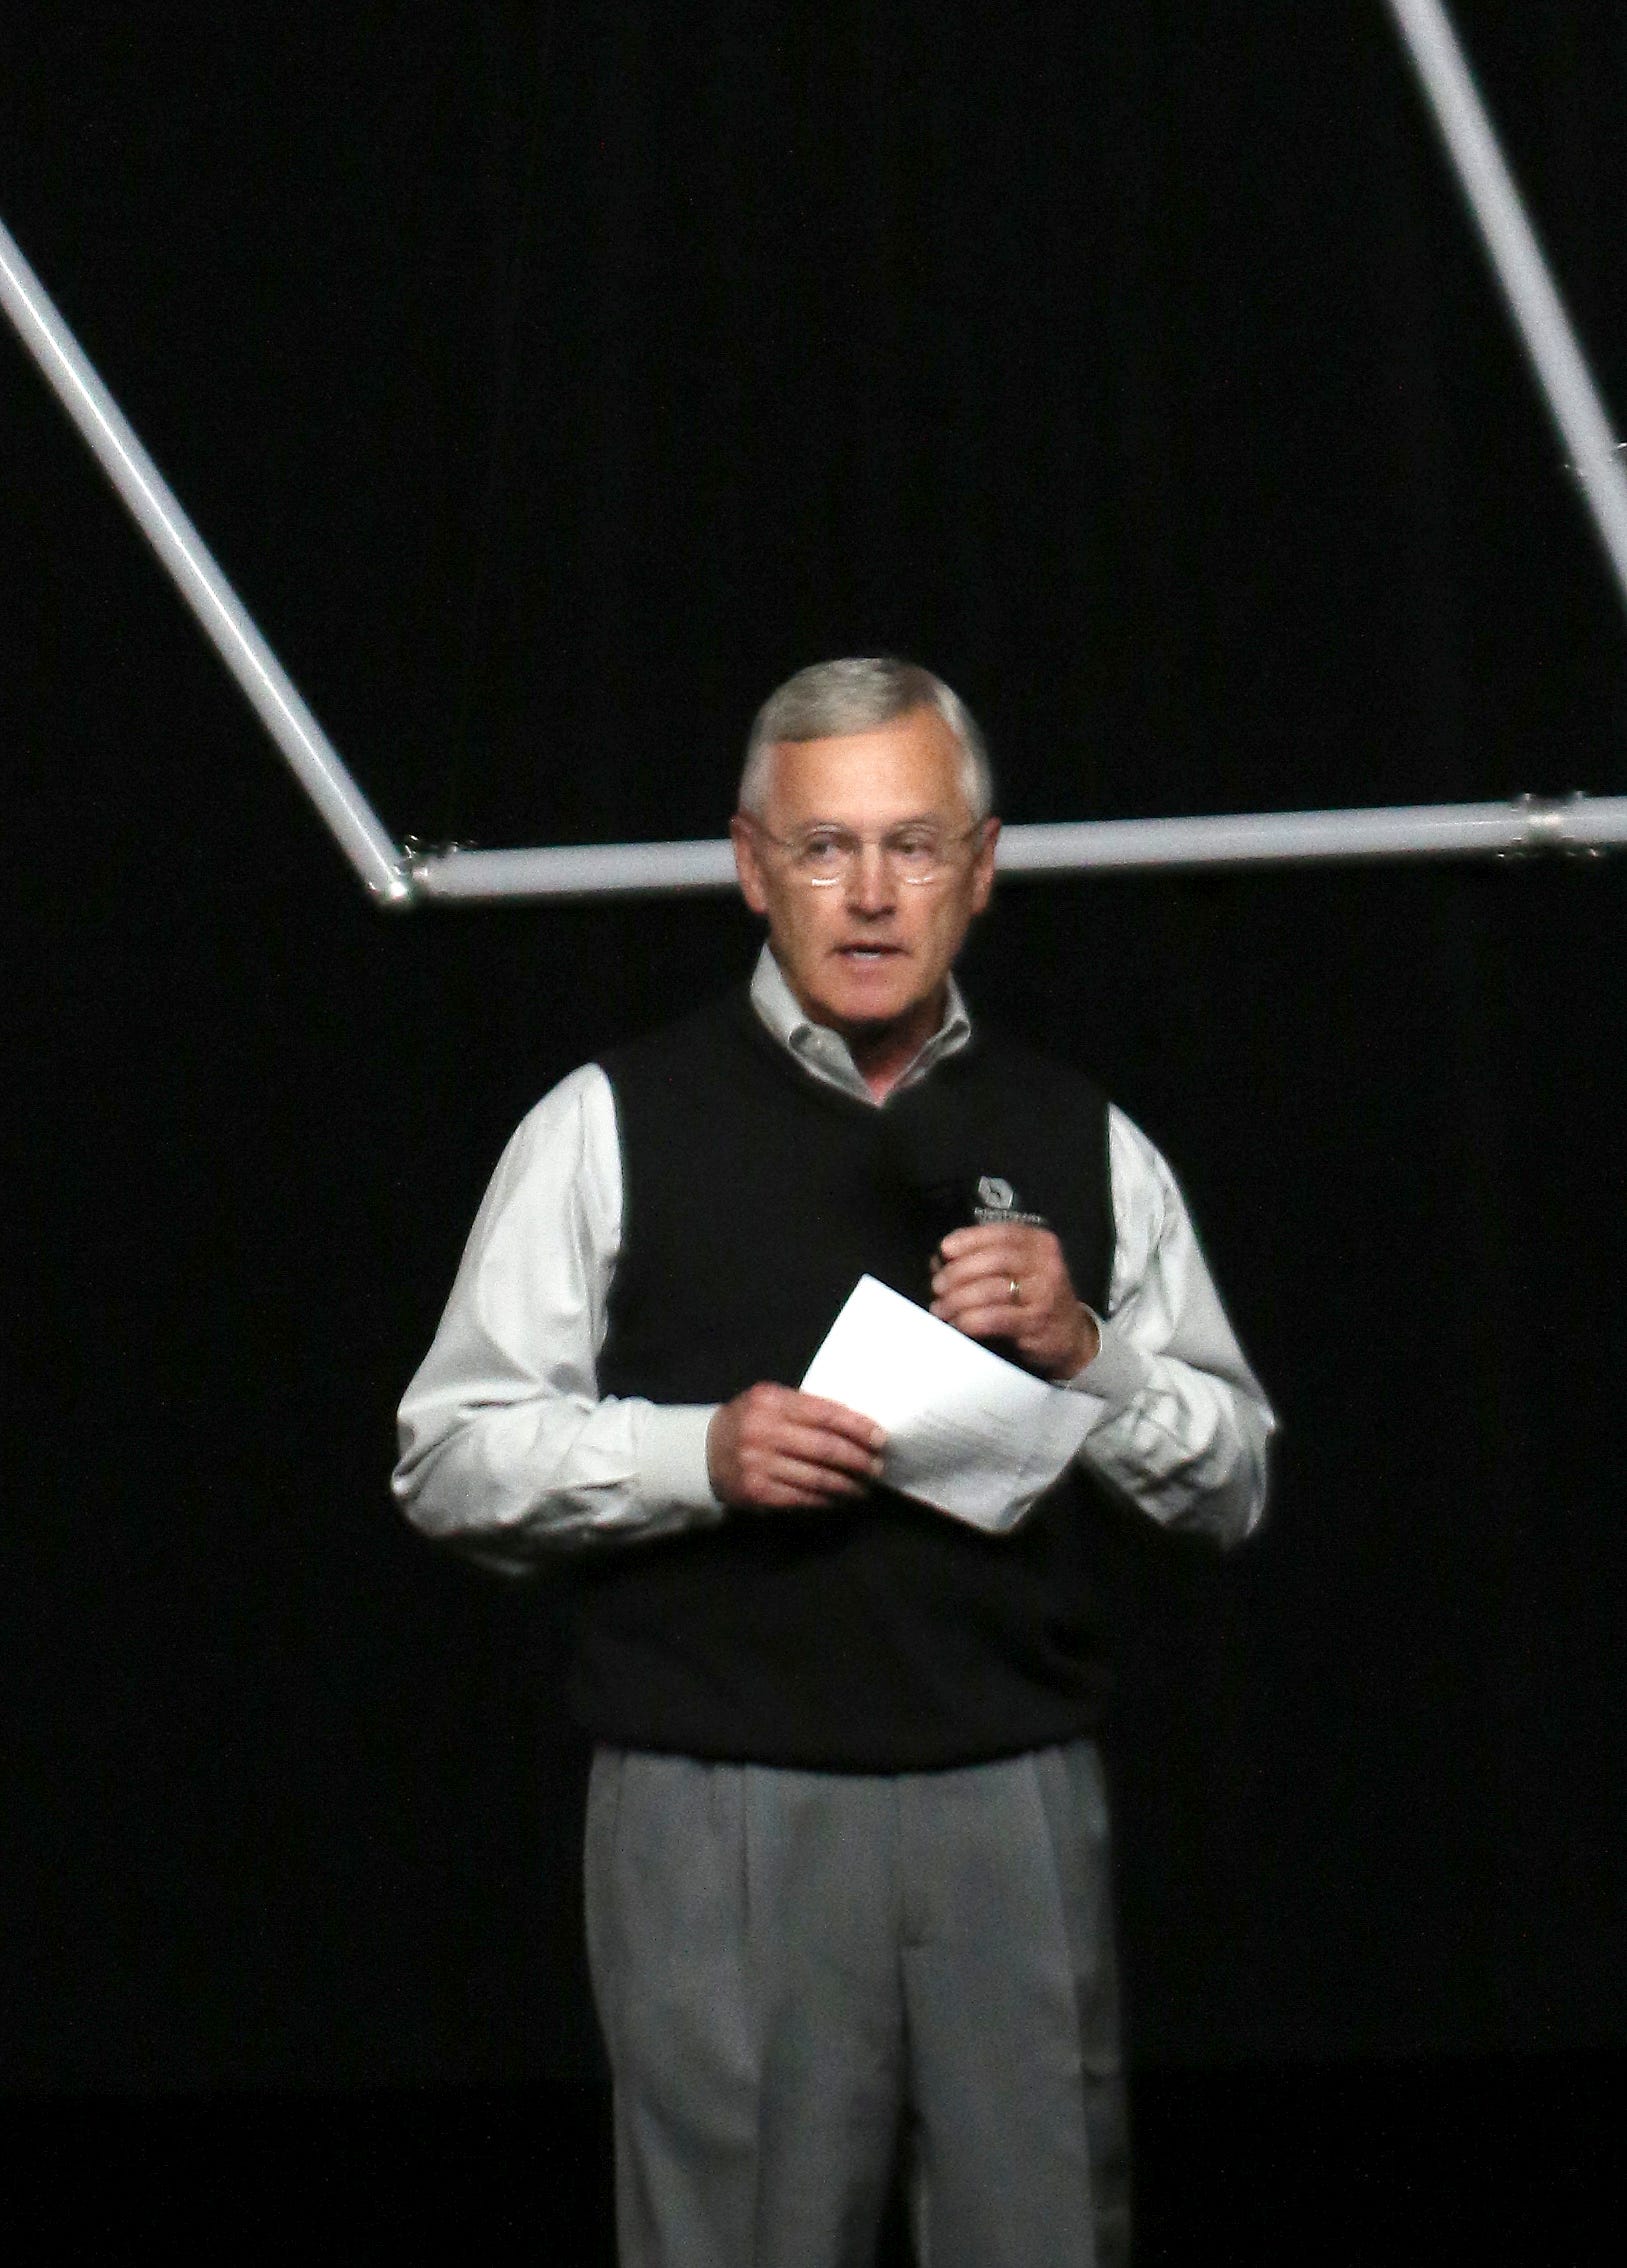 Youngstown State University President Jim Tressel emcees the event and introduces the speakers.